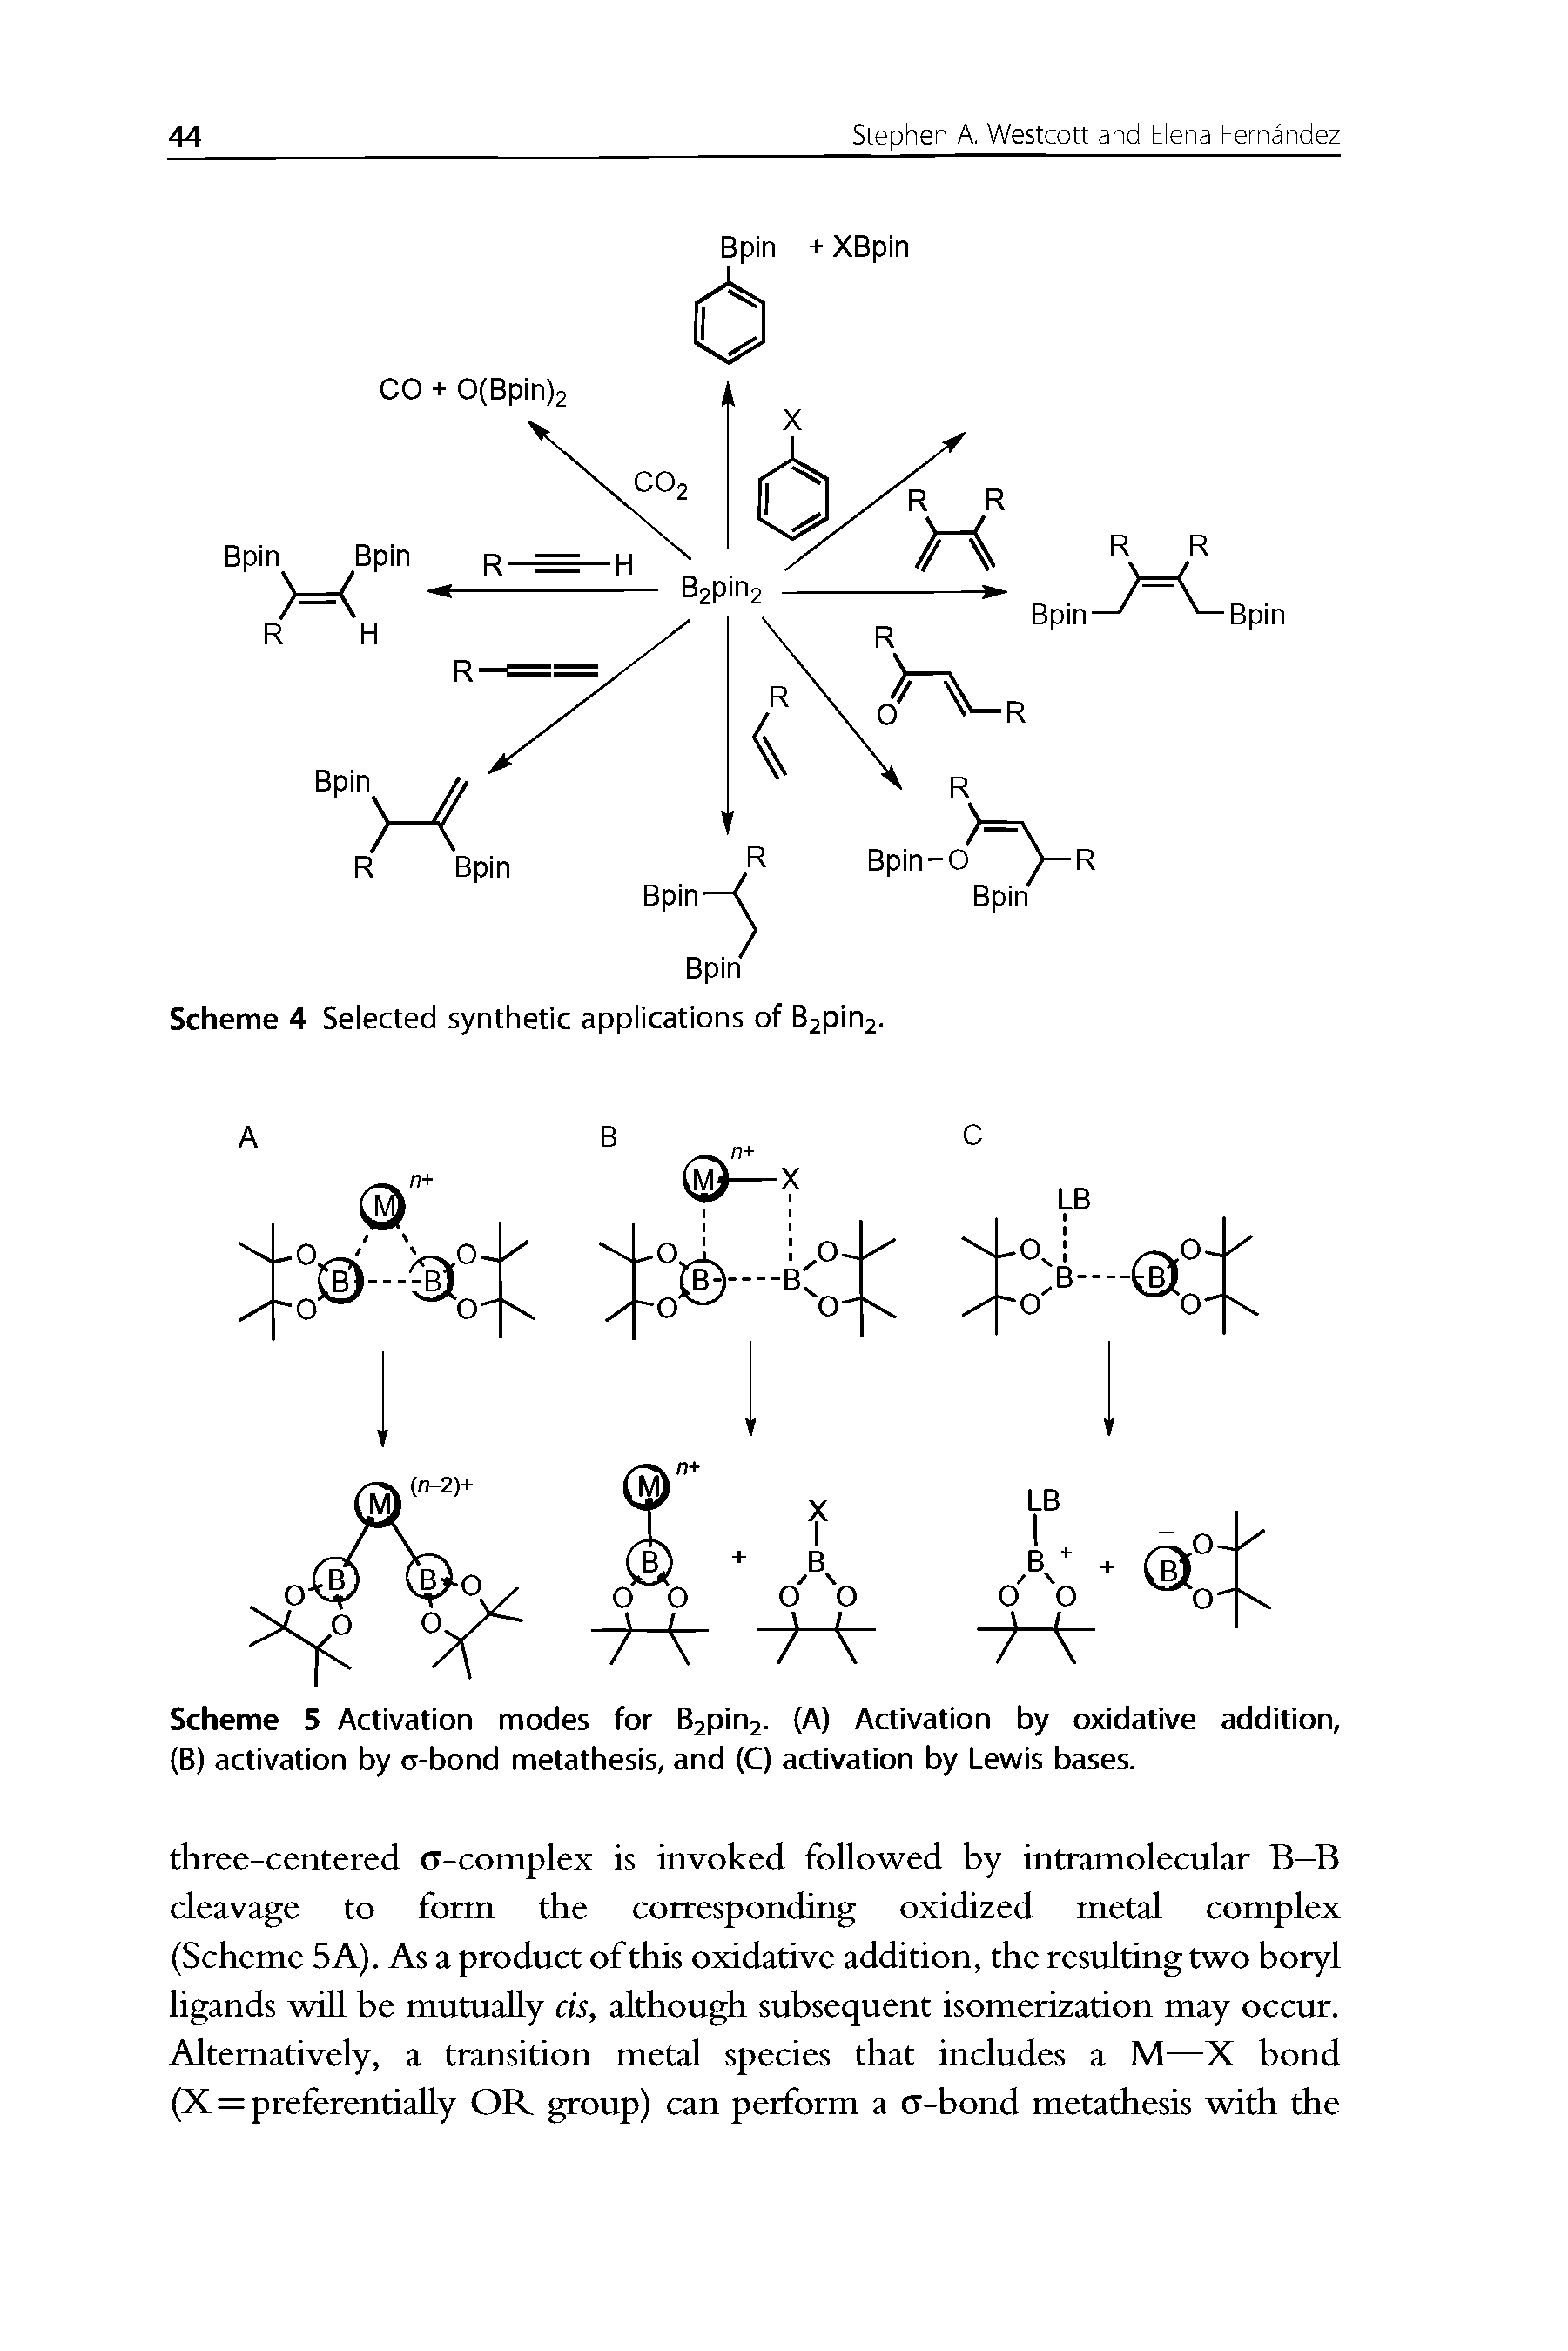 Scheme 5 Activation modes for B2pin2- (A) Activation by oxidative addition, (B) activation by o-bond metathesis, and (C) activation by Lewis bases.